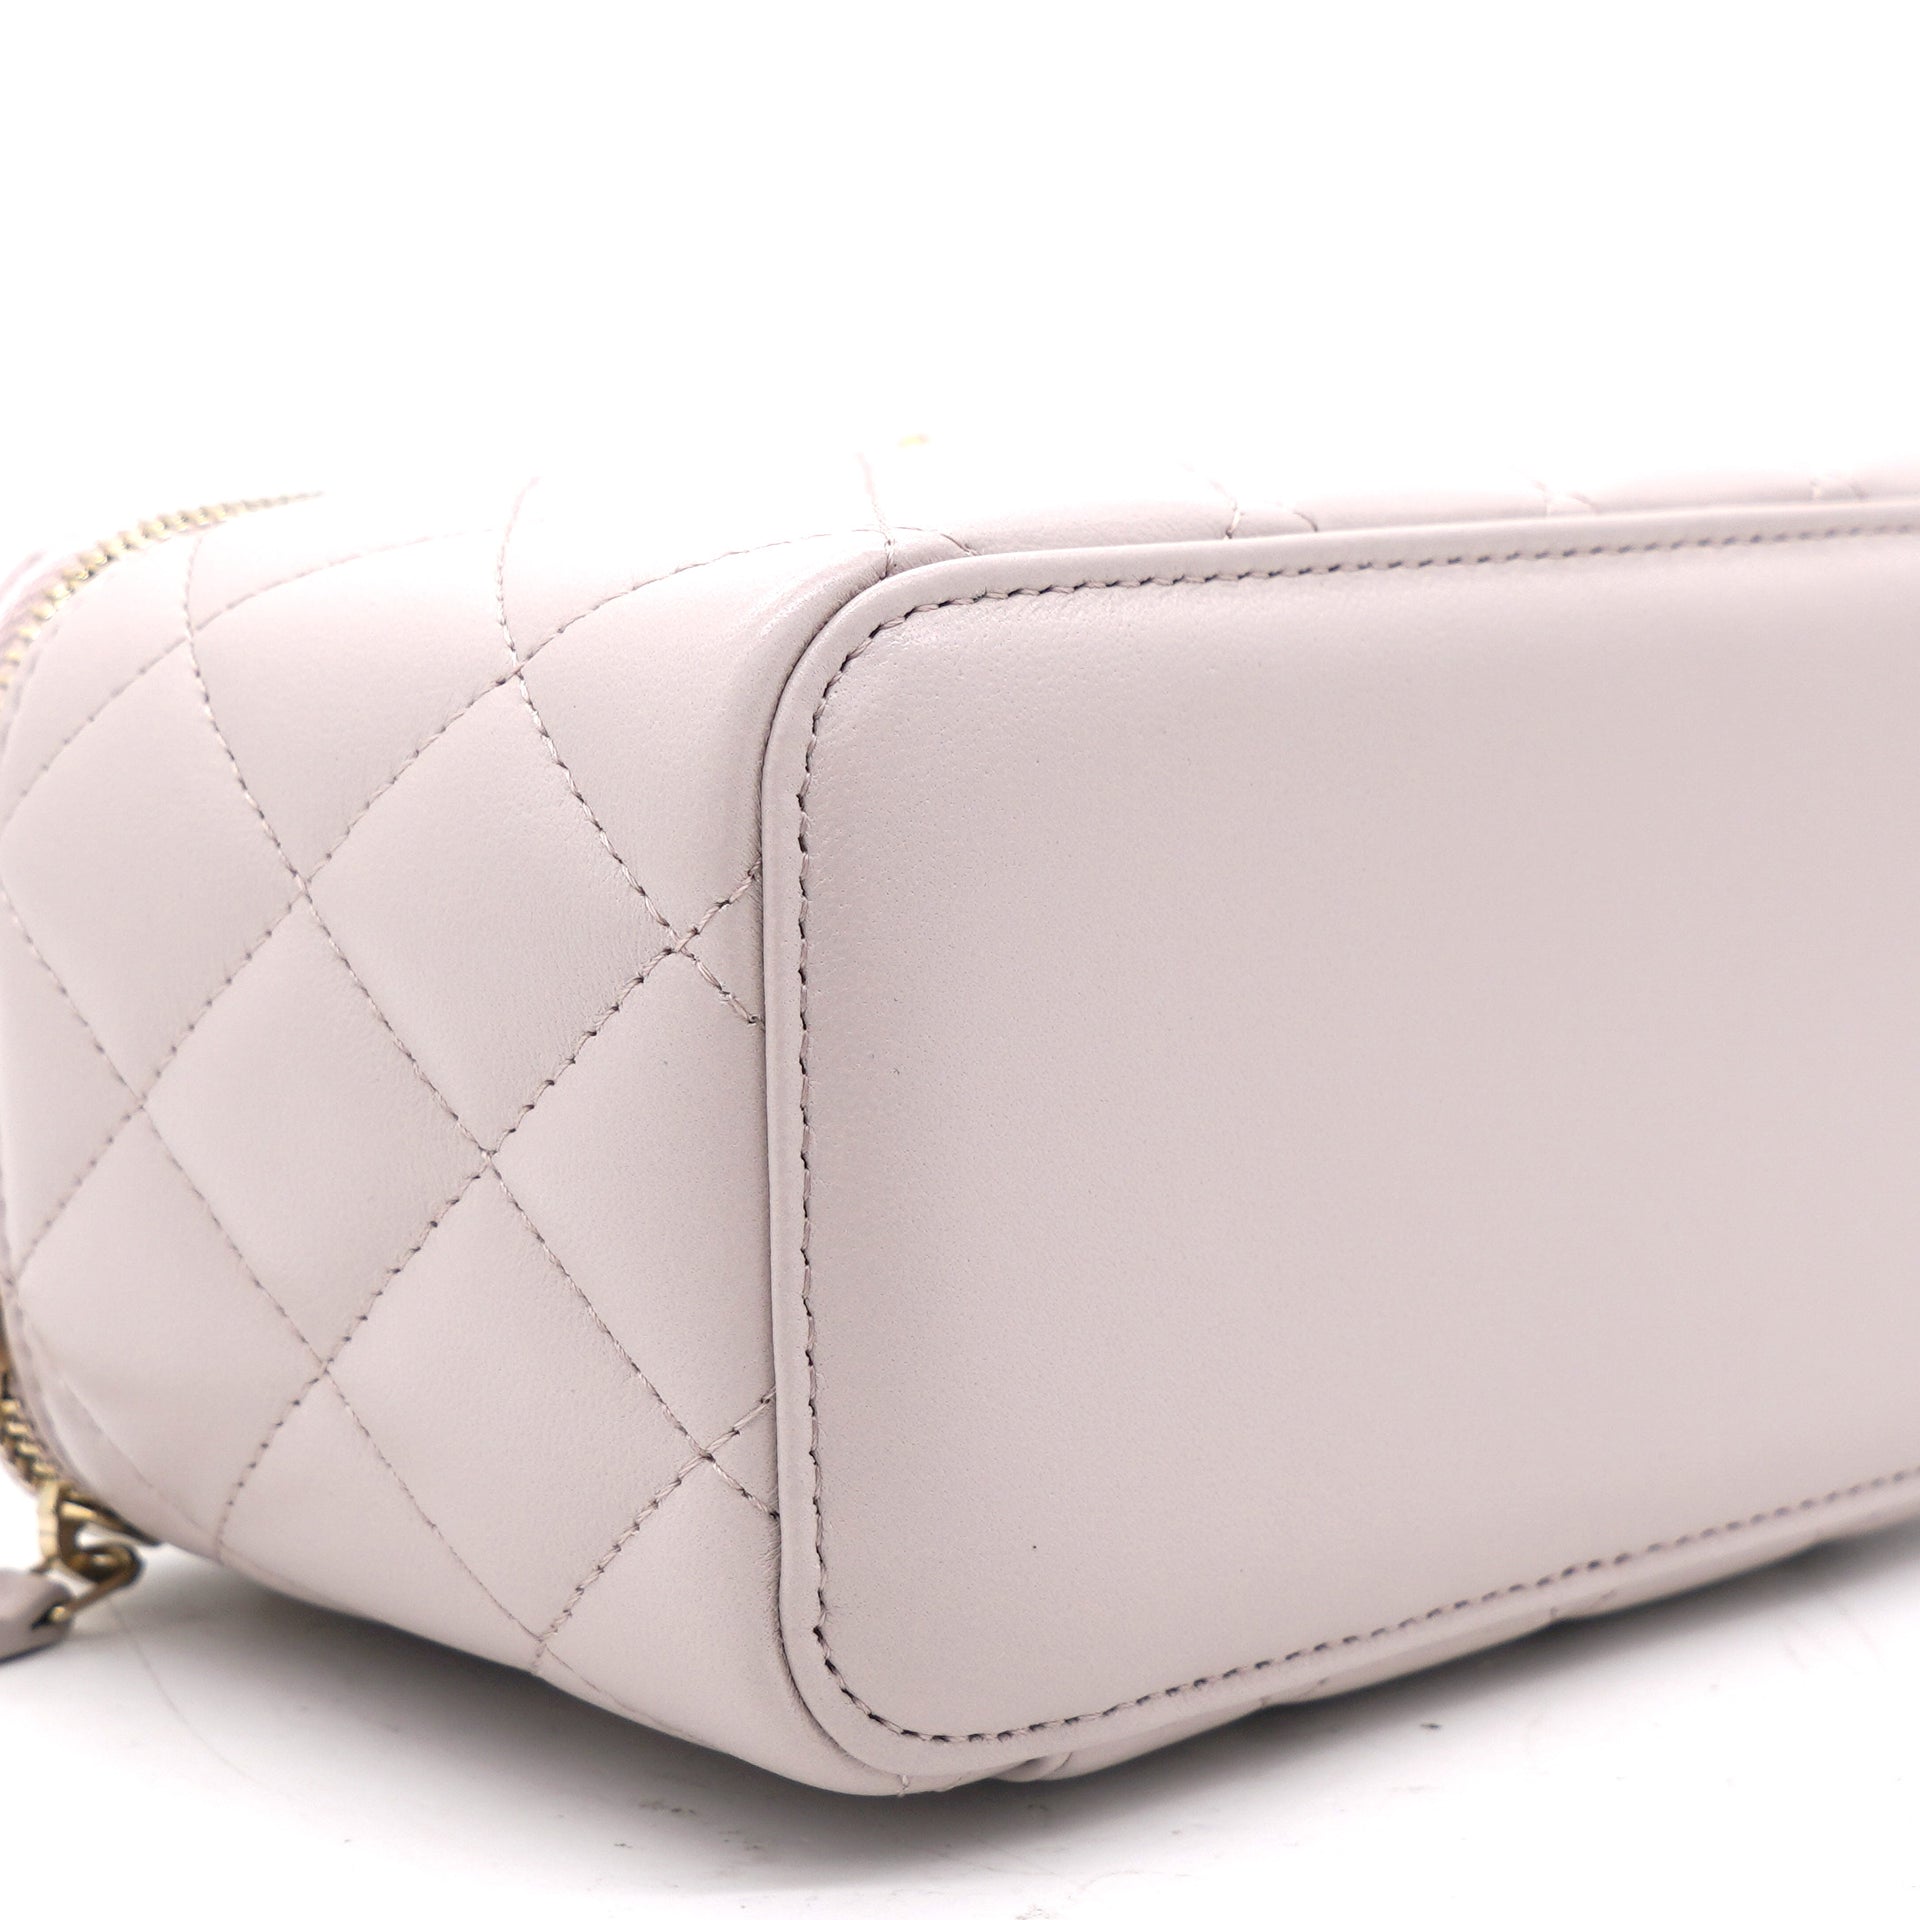 Lambskin Quilted Pearl Crush Small Vanity Case With Chain Lilac